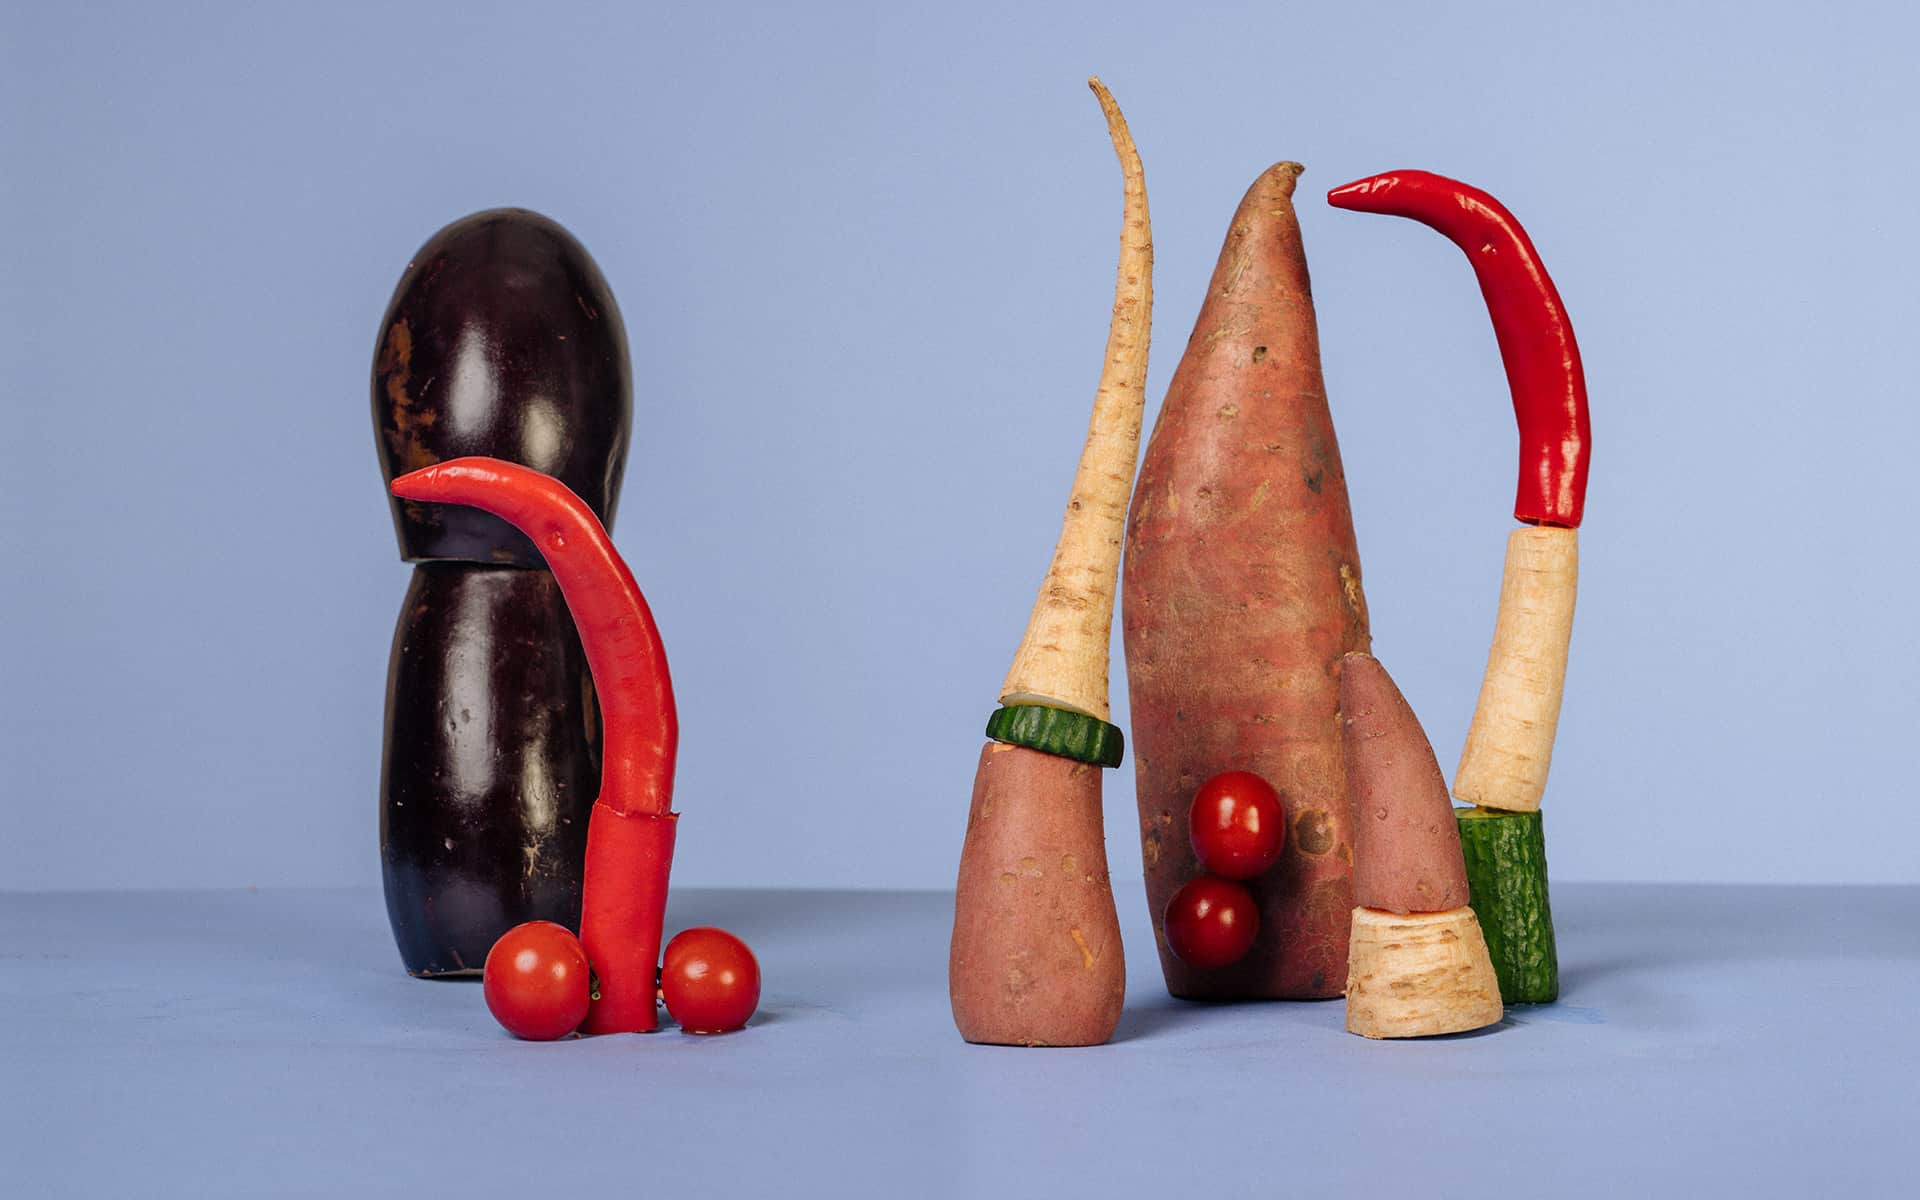 Vegetables resembling penises in all kinds of shapes and sizes